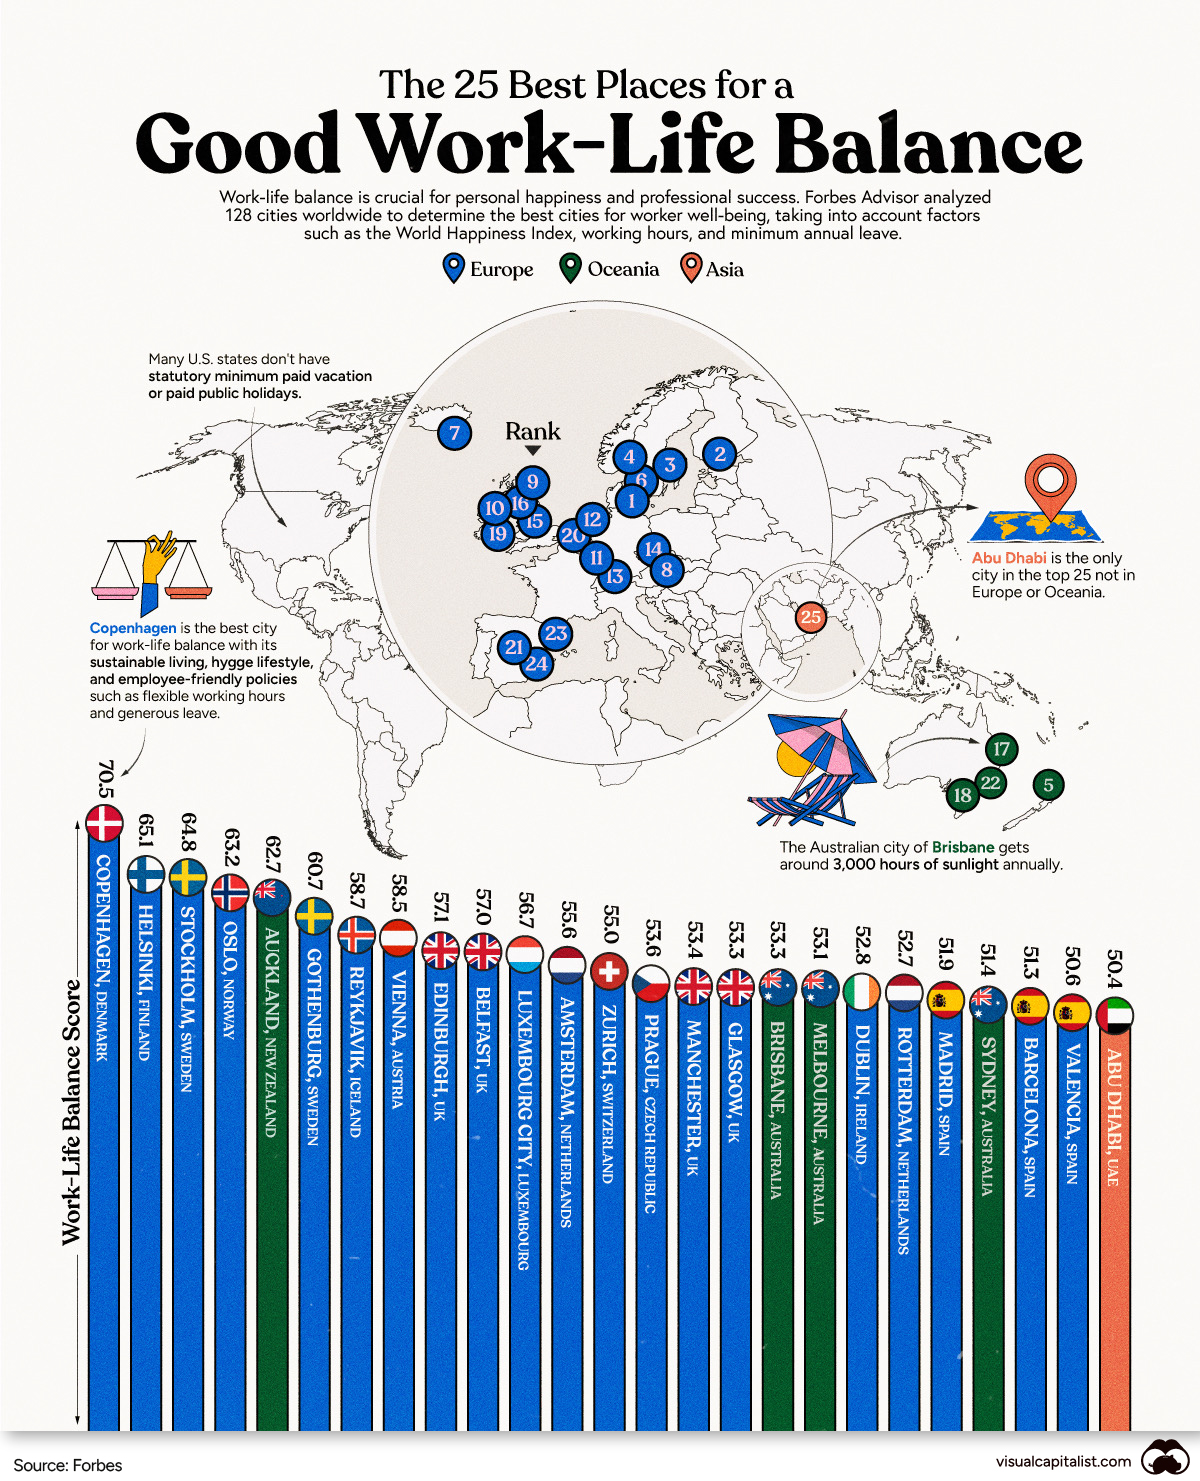 The Cities with the Best Work-Life Balance in the World